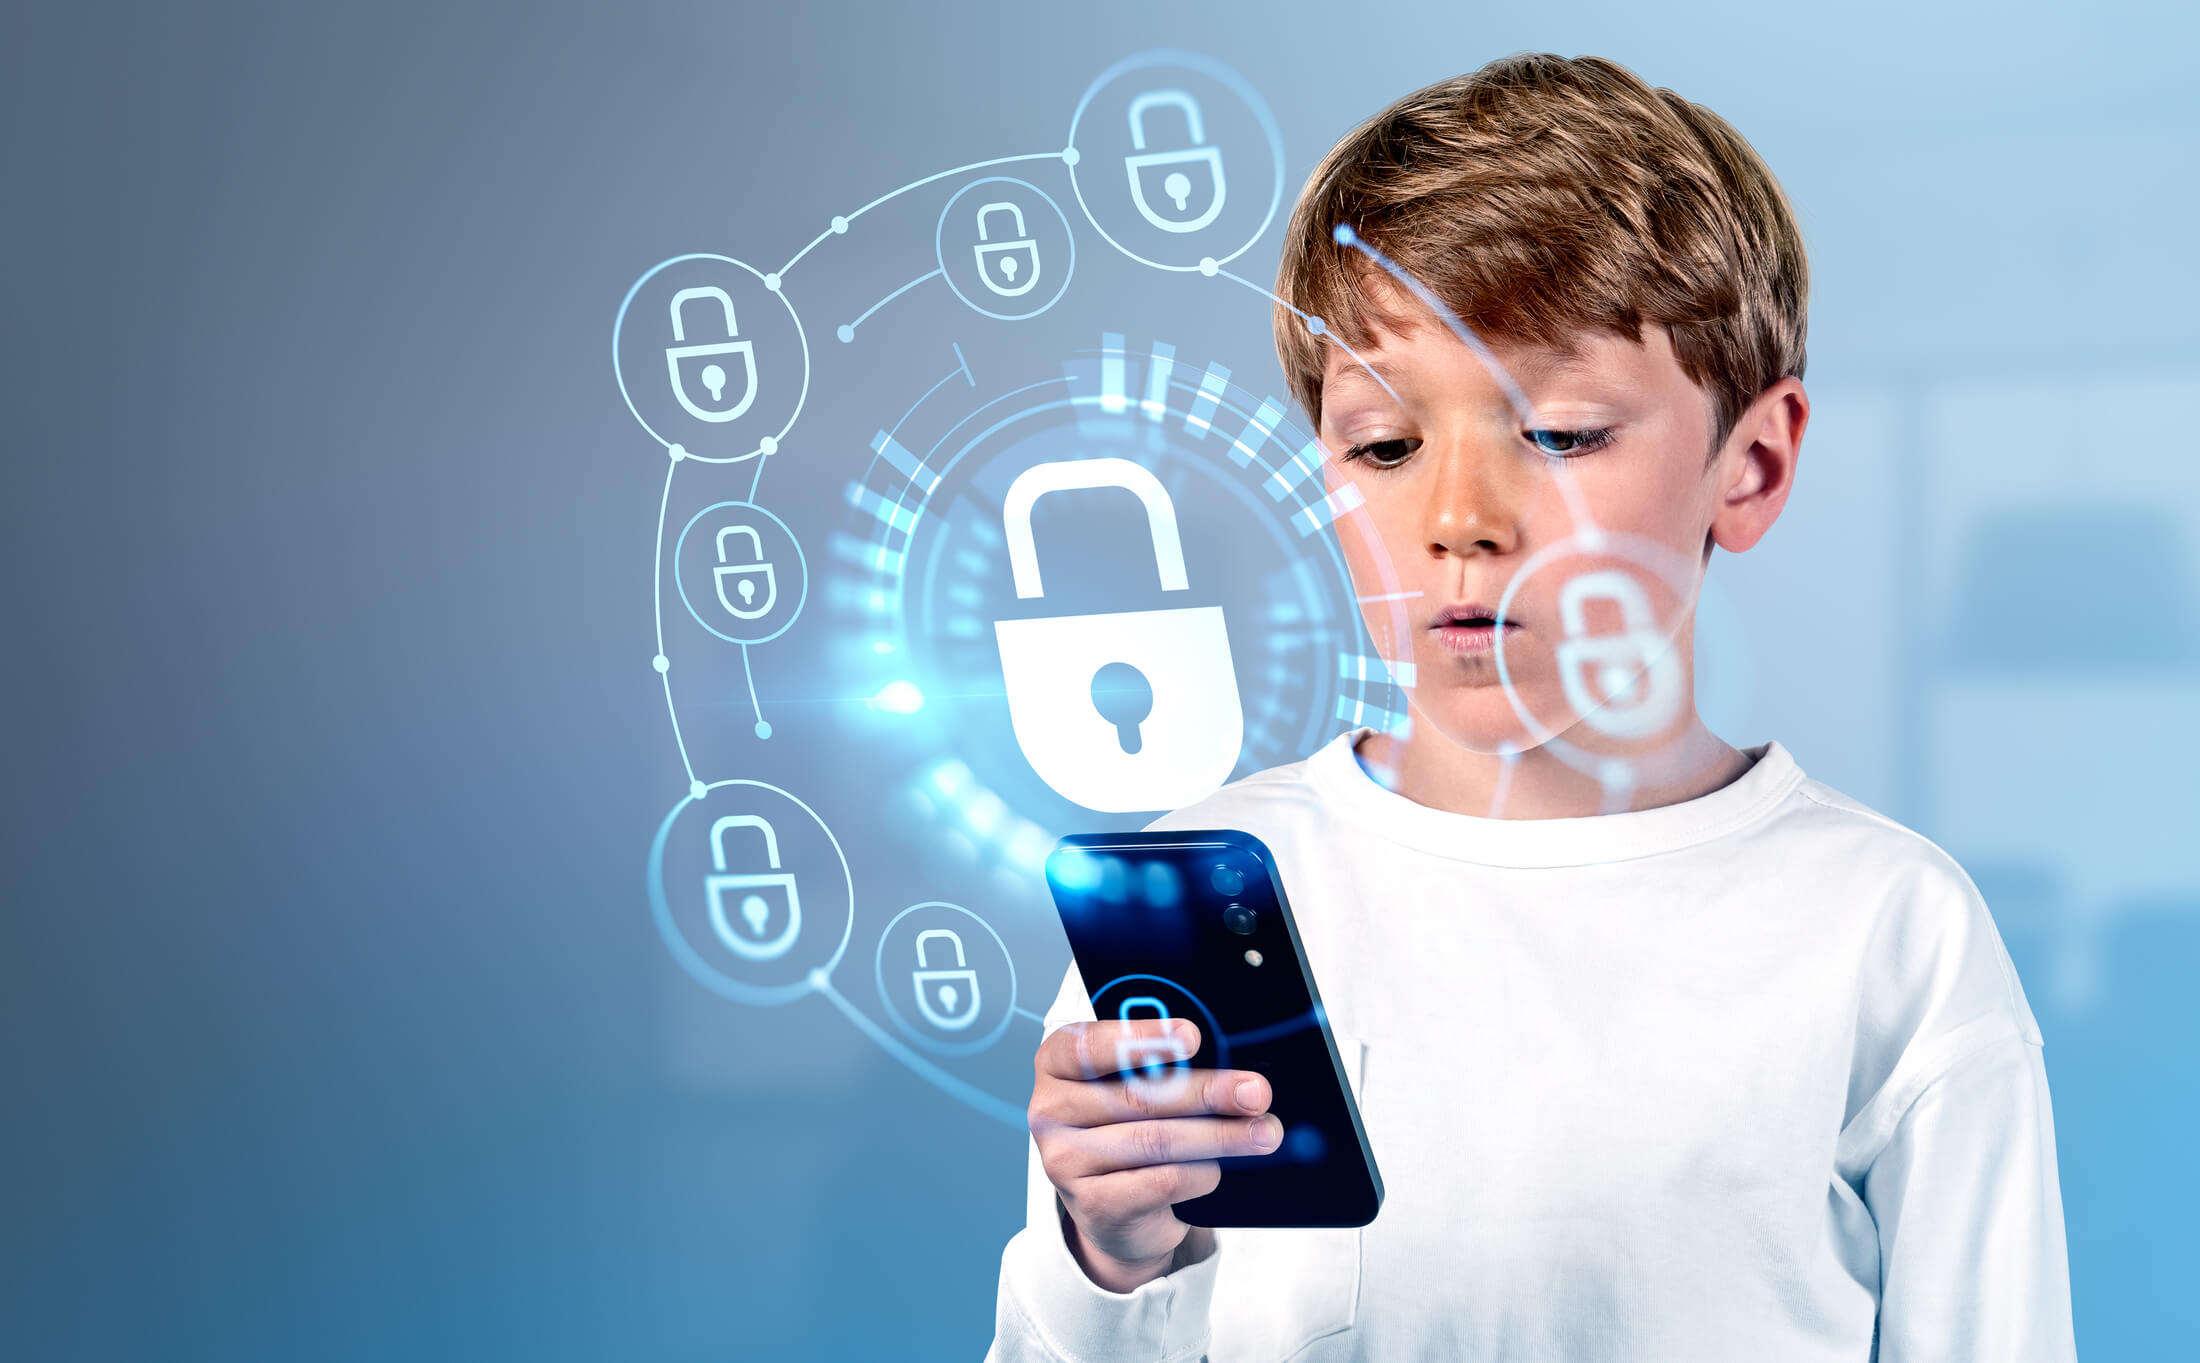 Boy with smartphone, data protection interface